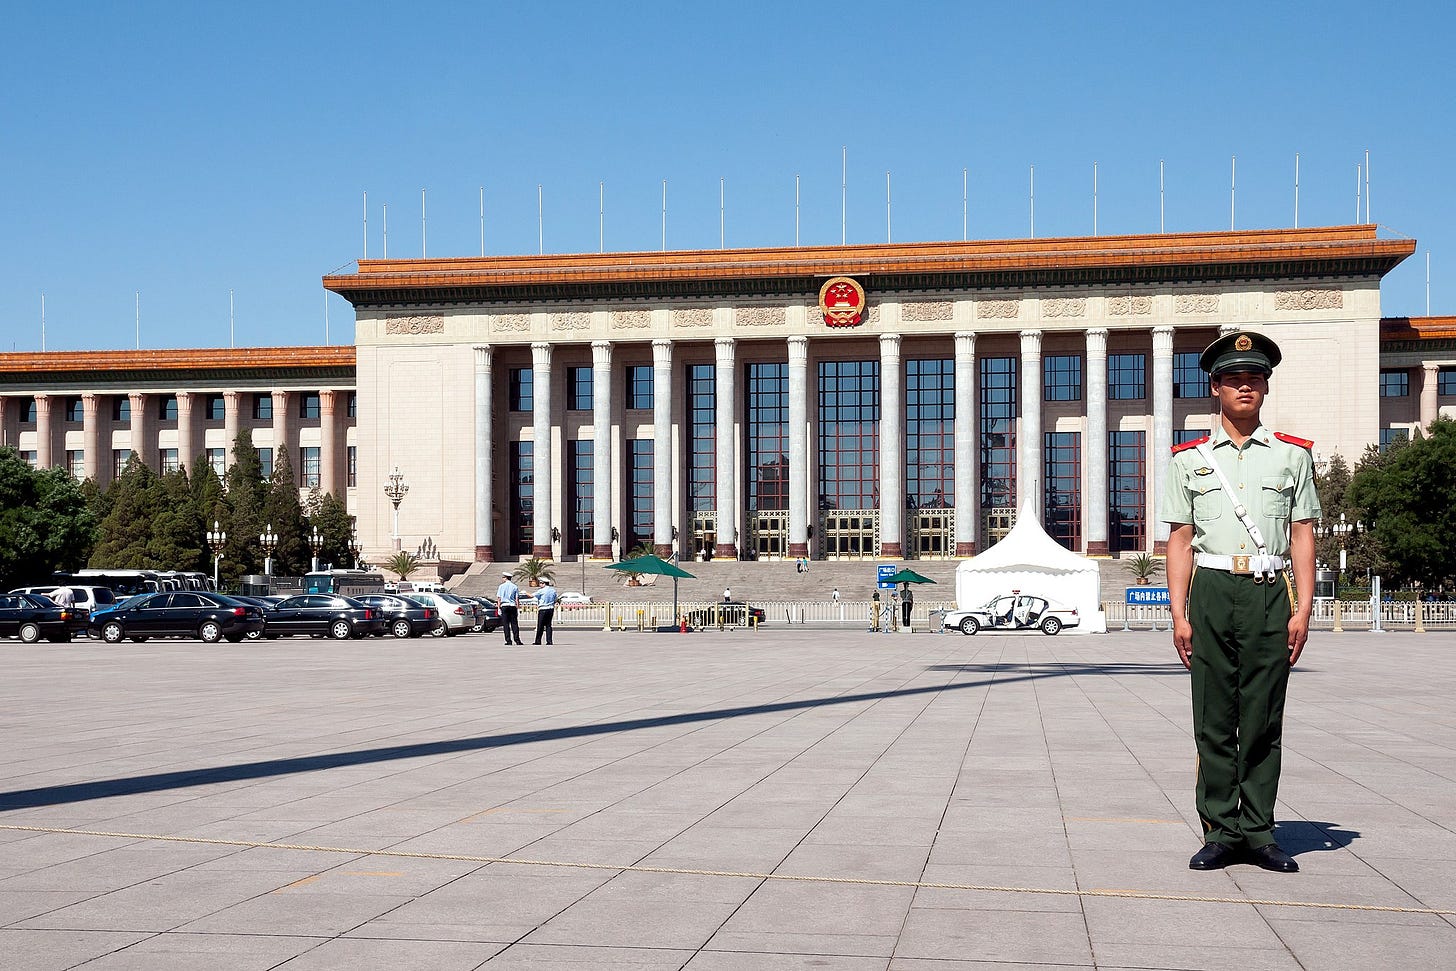 A member of People's Armed Police standing guard in front of the Great Hall of the People at Tiananmen Square, Beijing (Photo by CEphoto, Uwe Aranas)